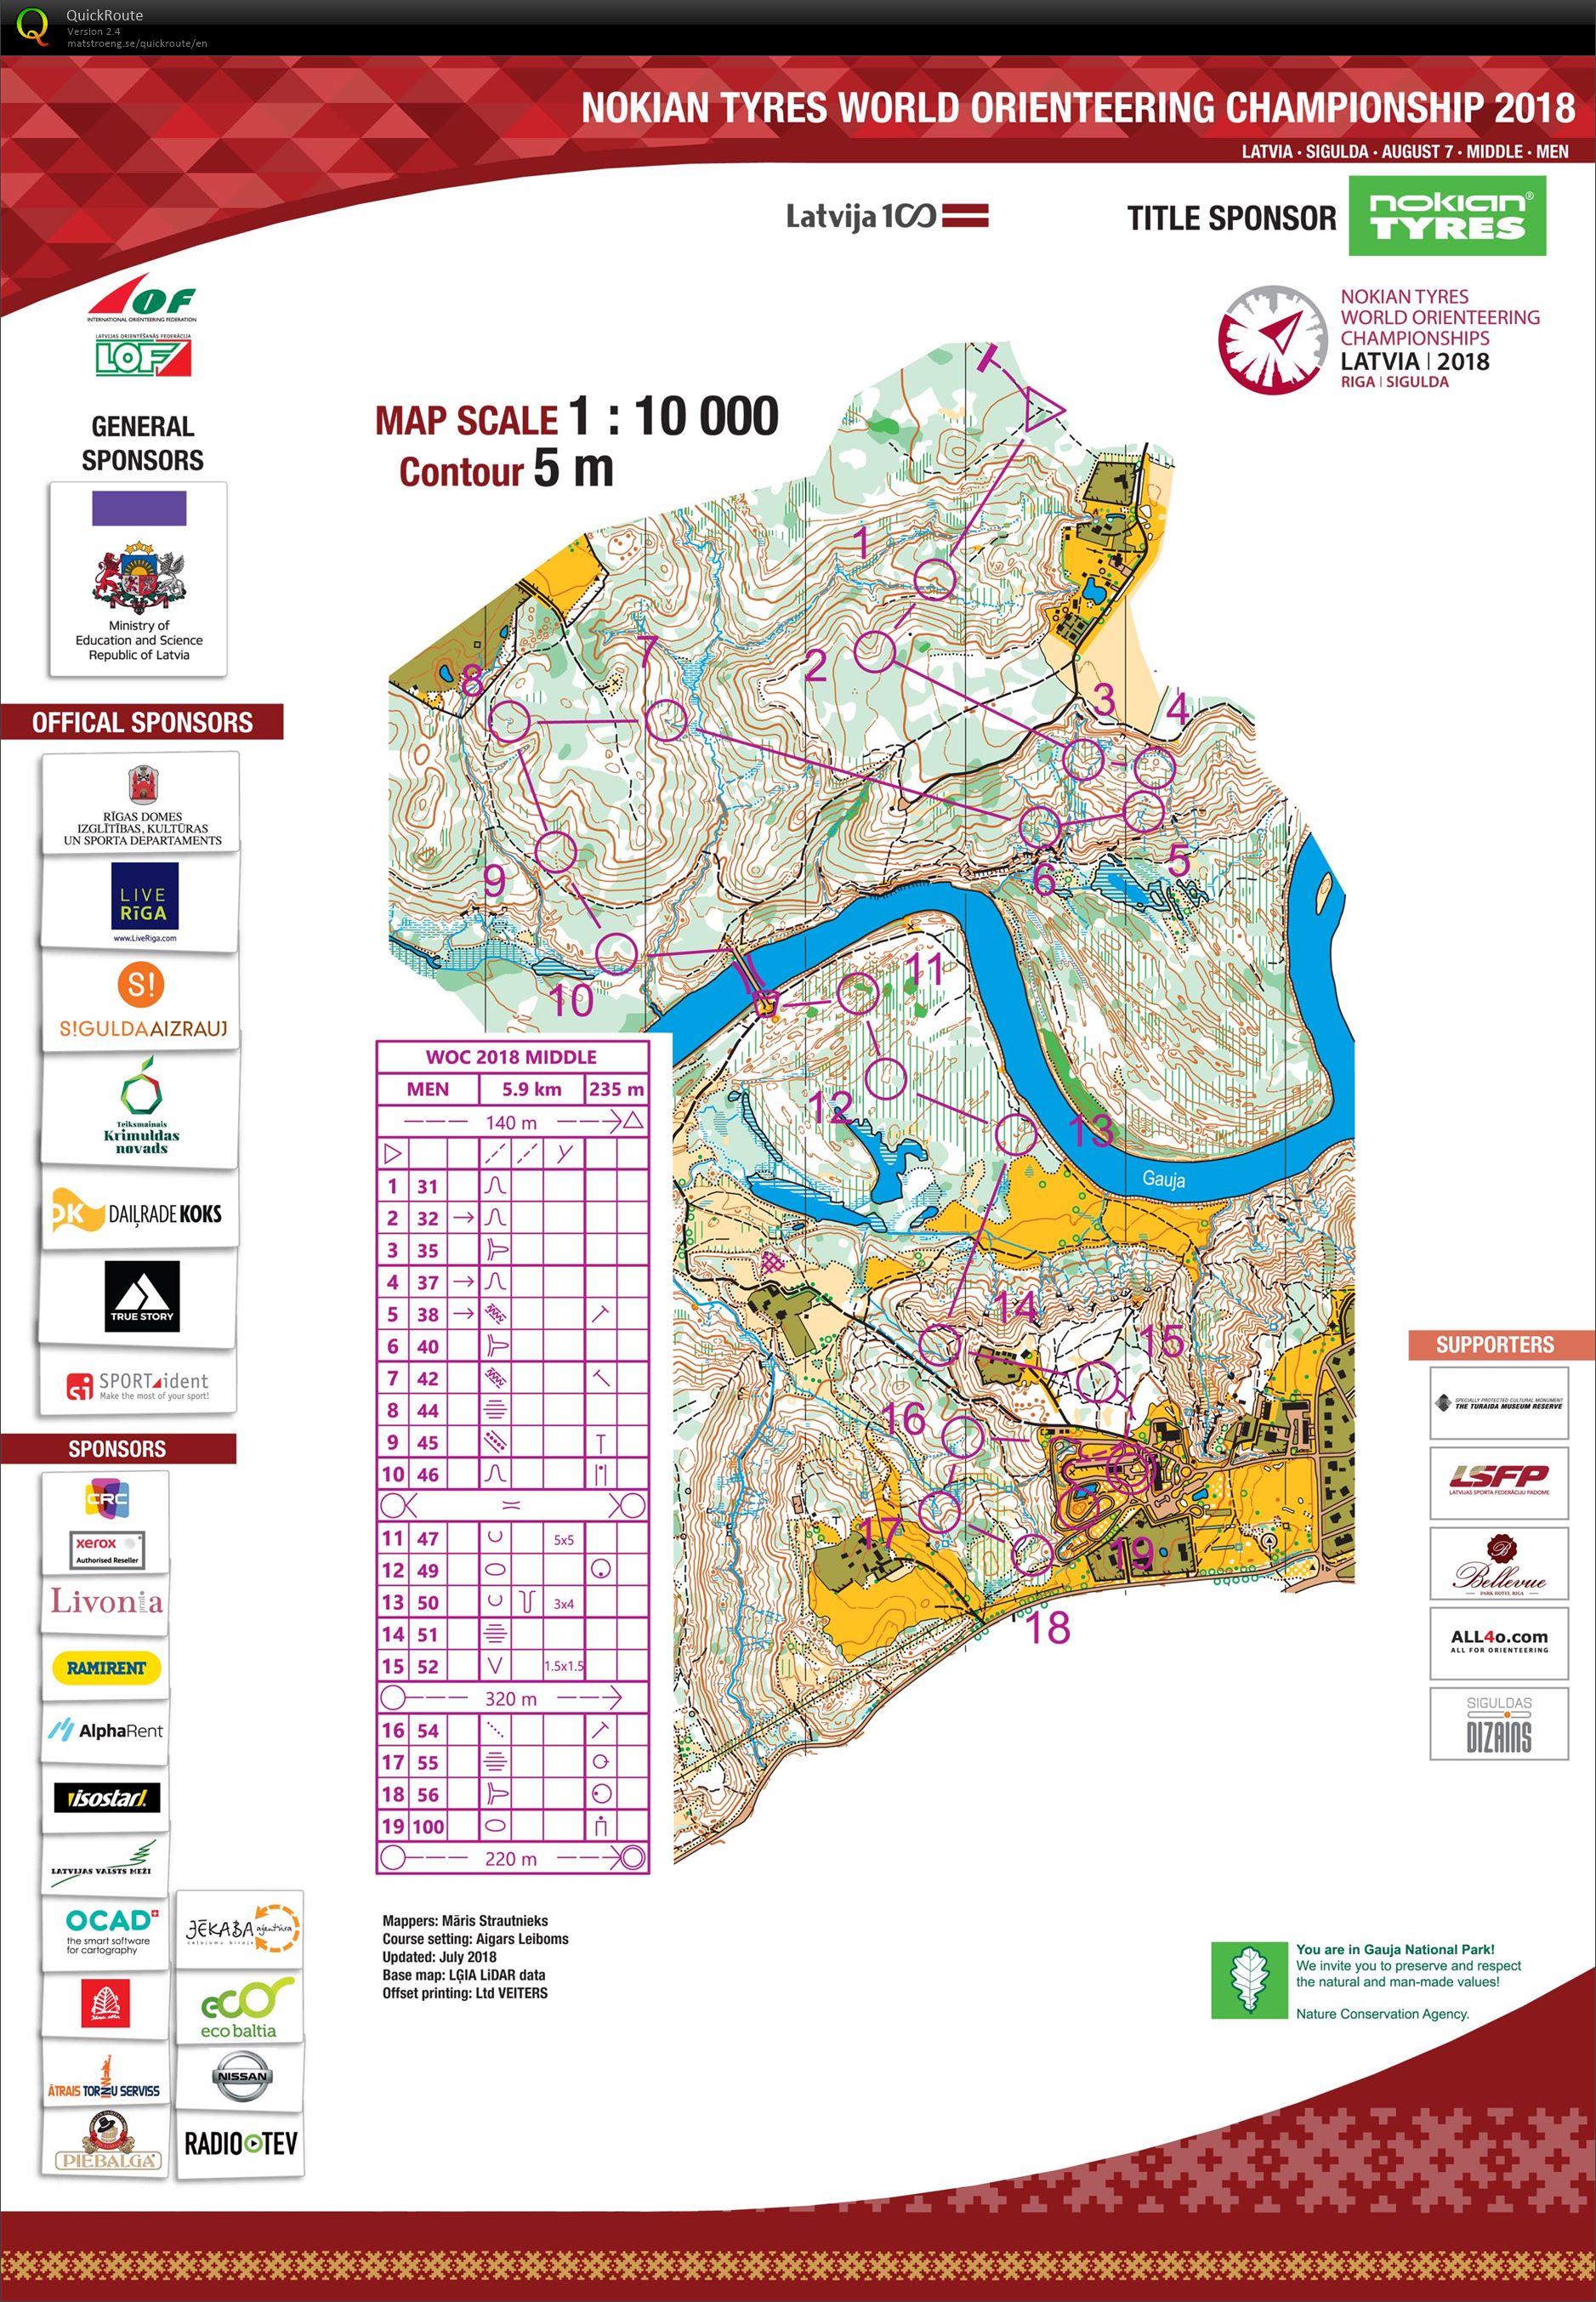 WOC 2018 Middle - 47:13 (2020-05-13)